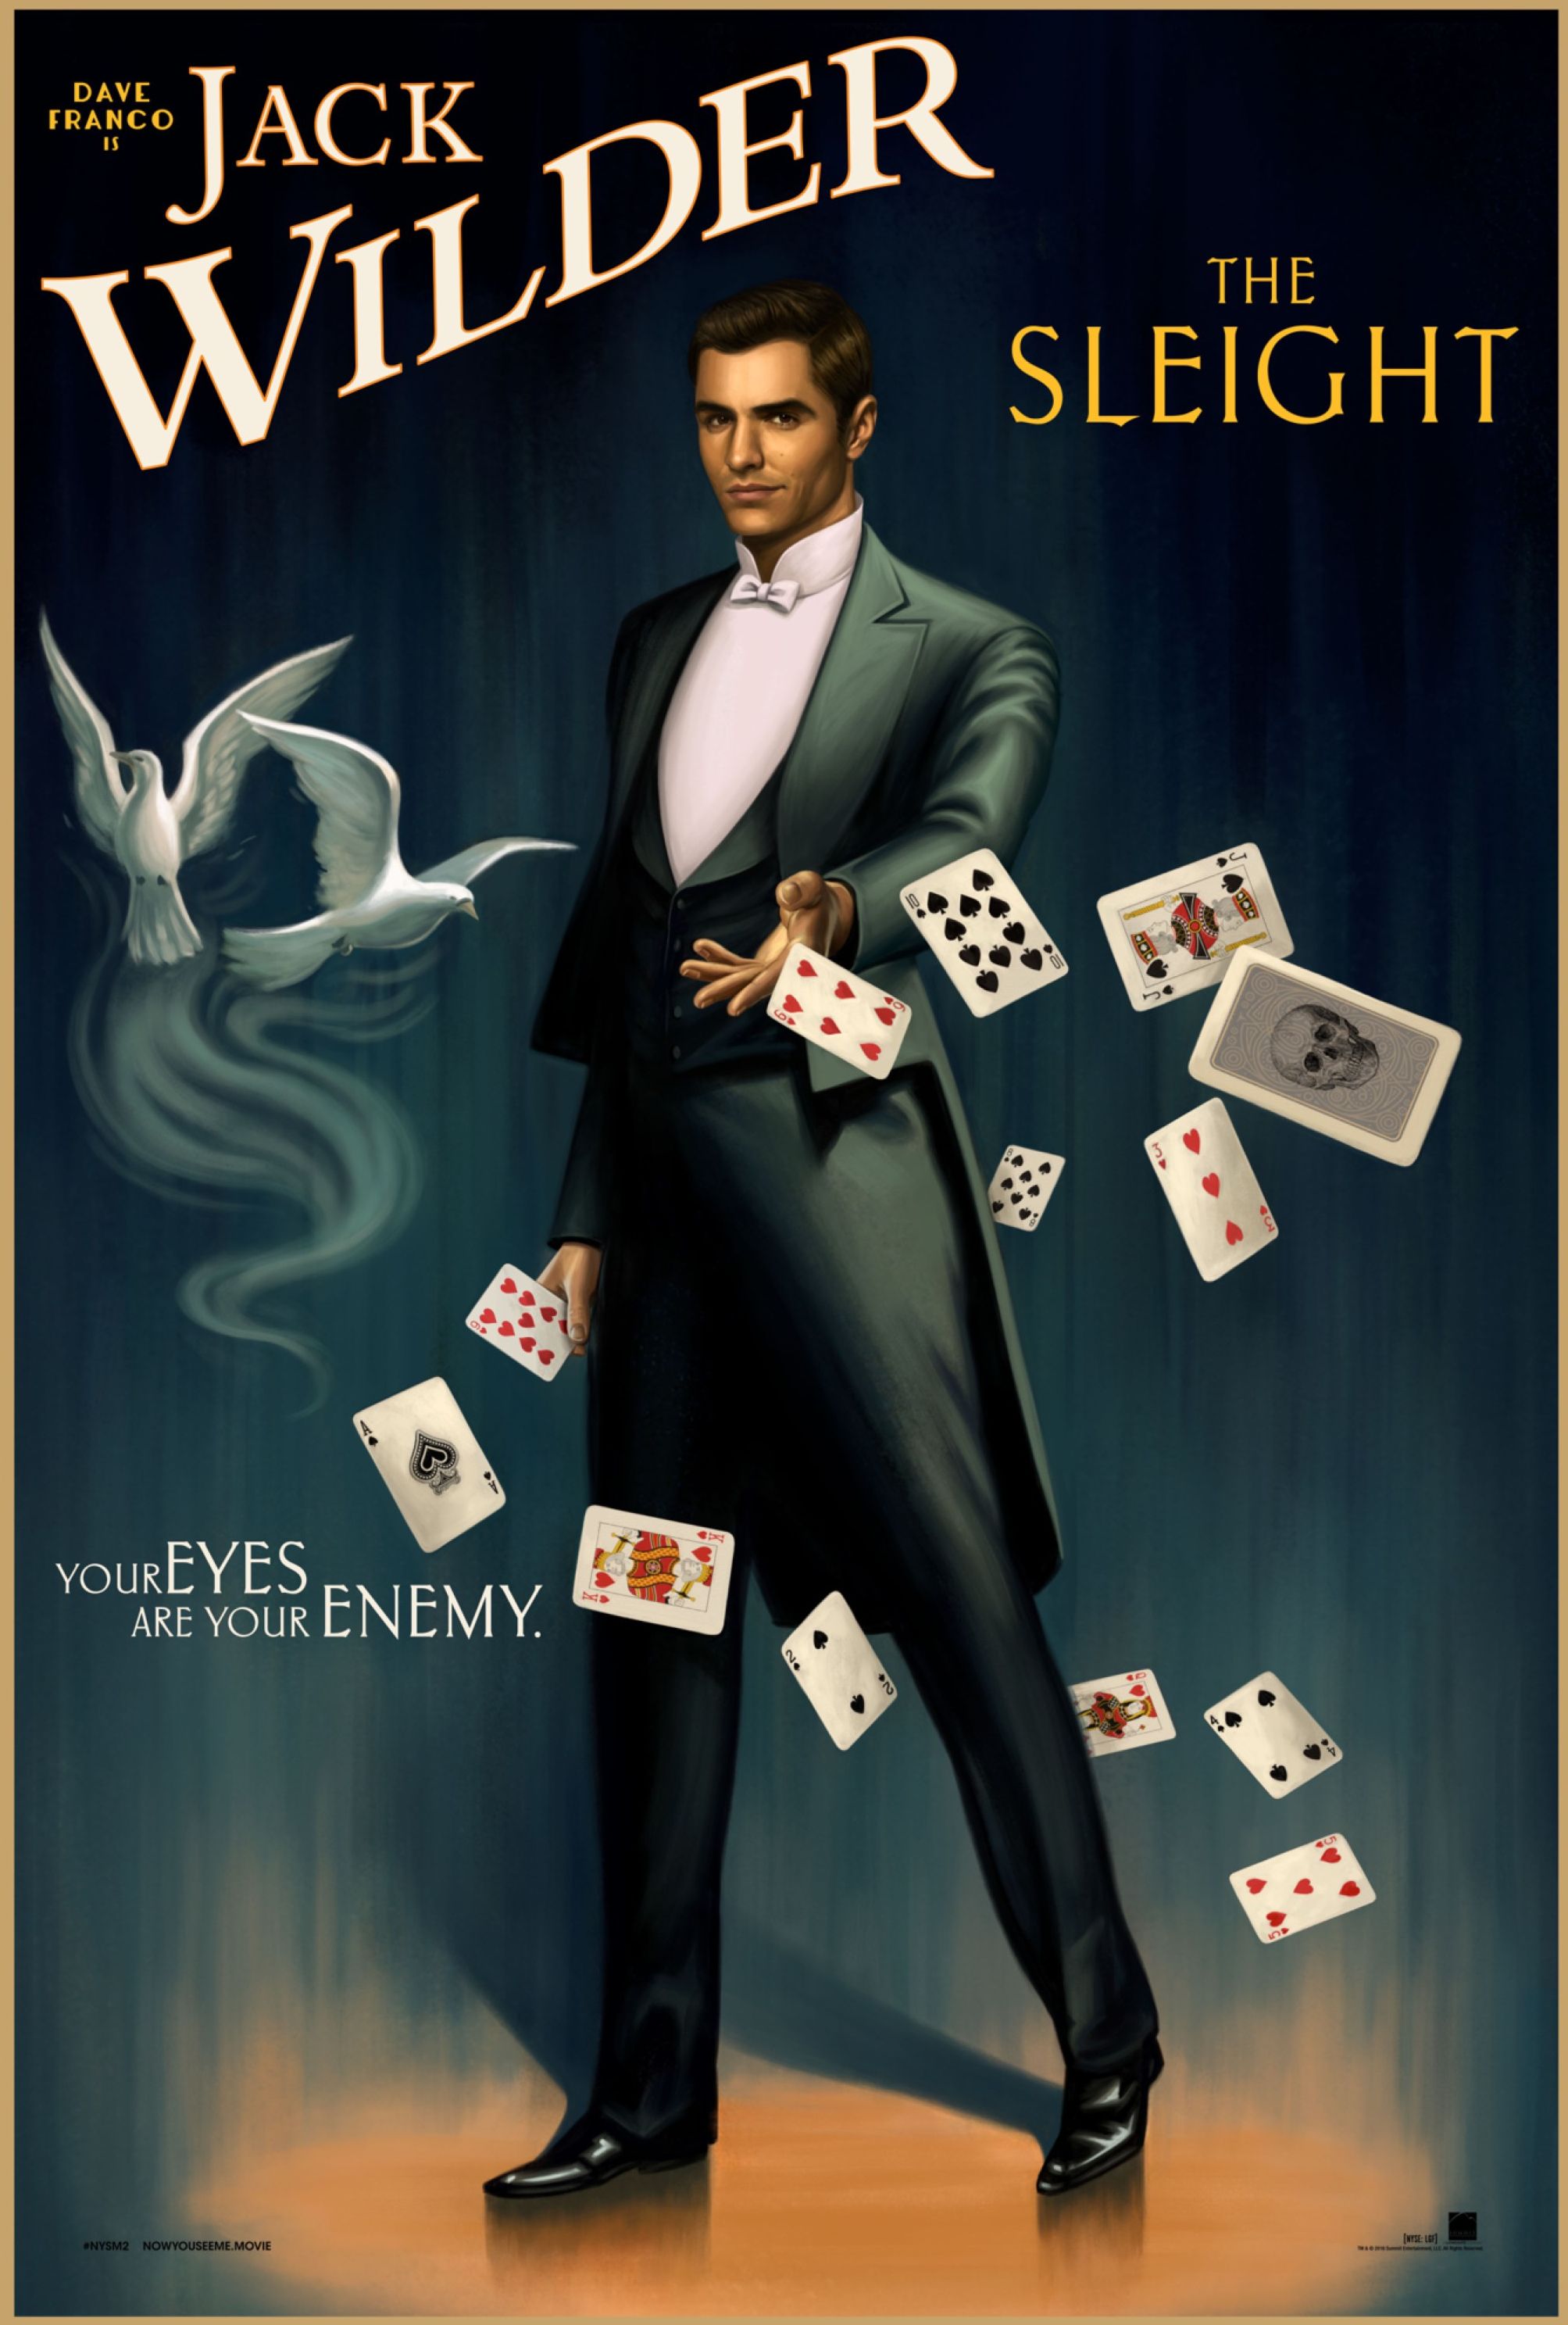 Dave Franco in retro poster for Now You See Me 2